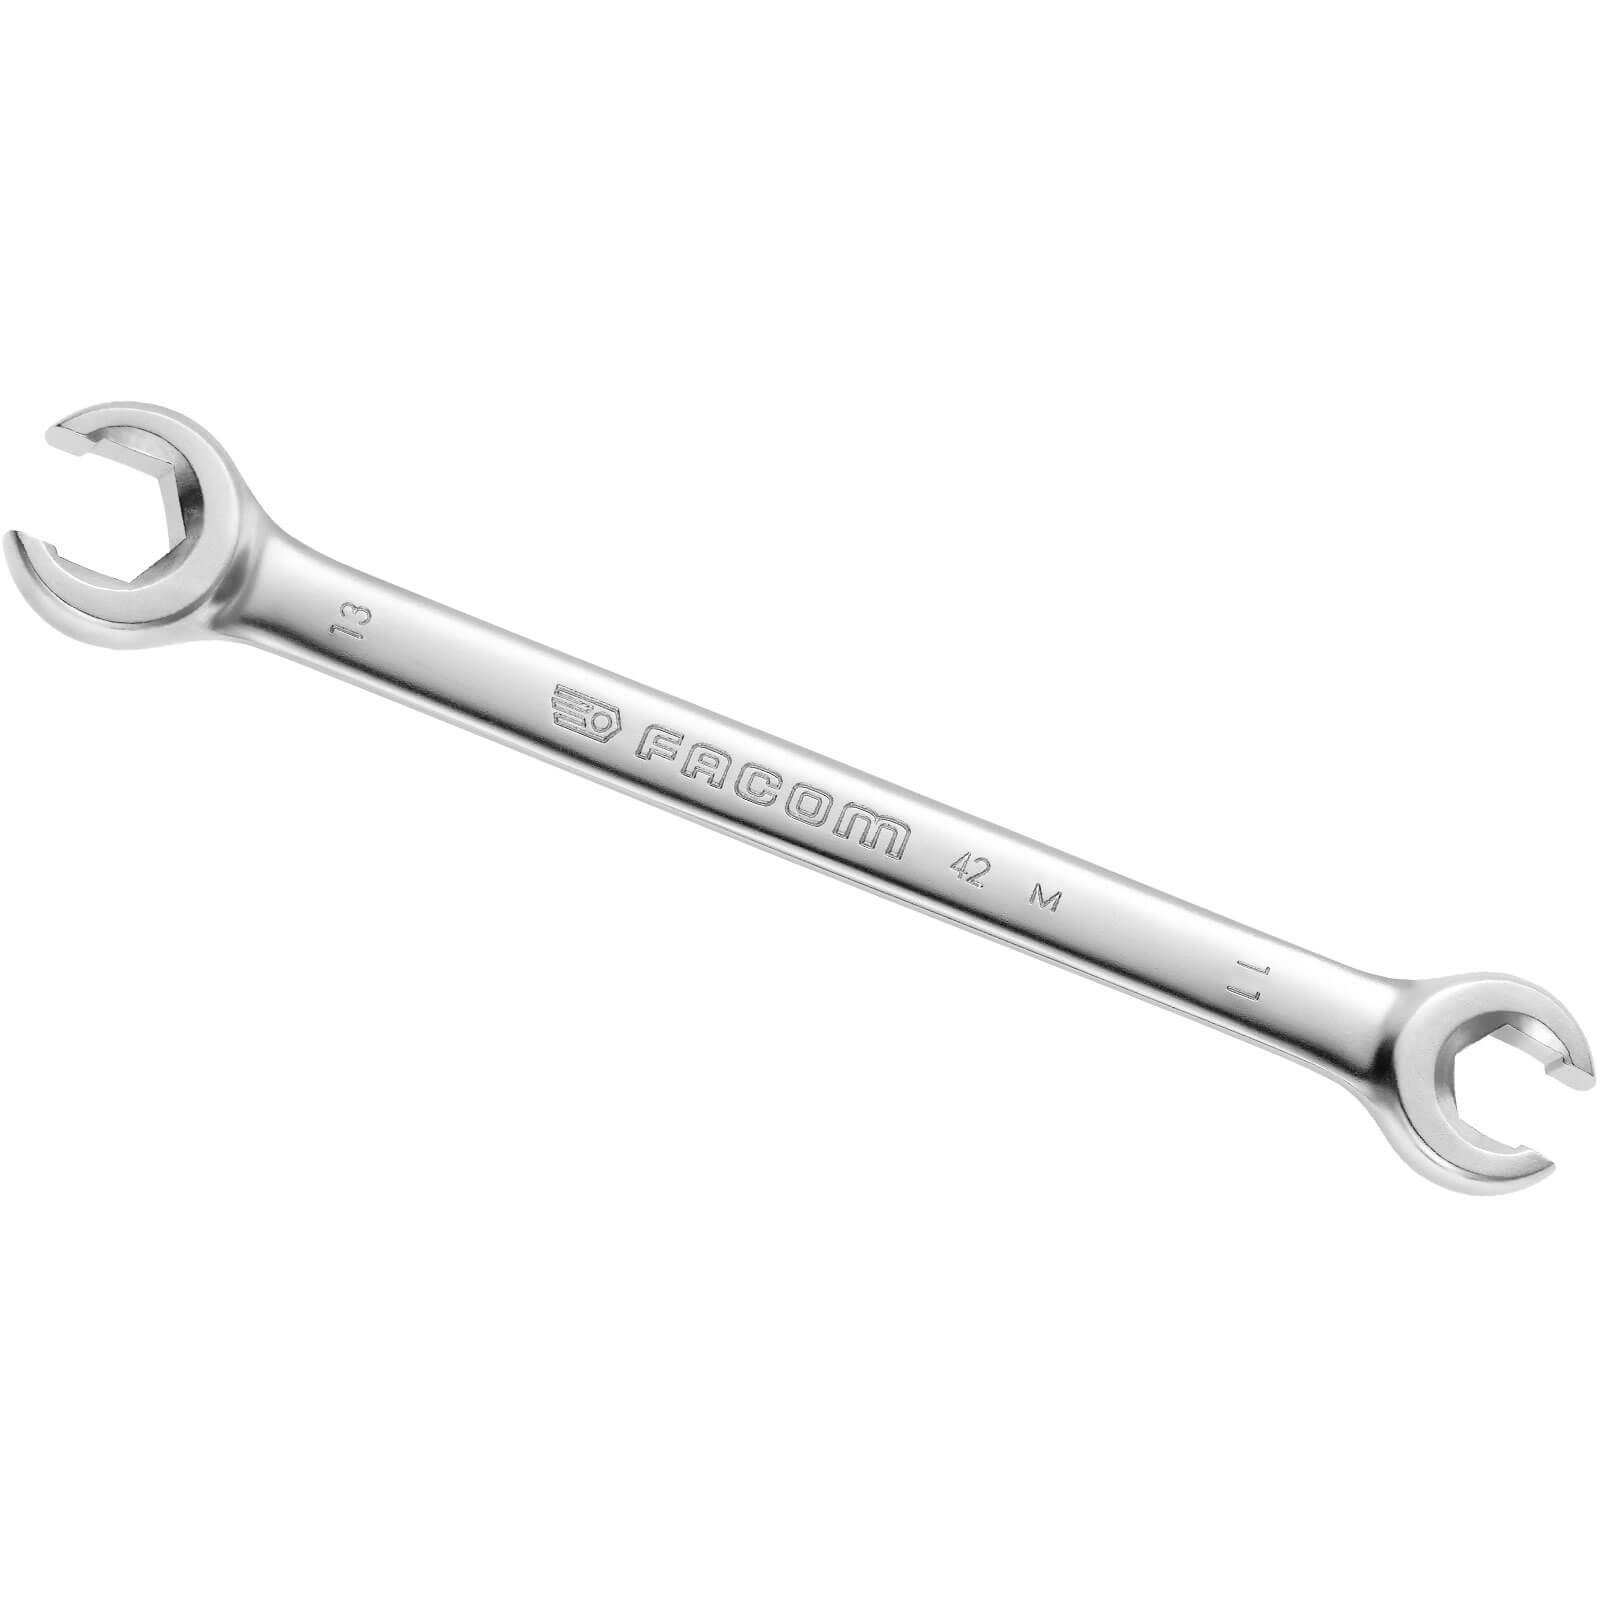 Facom Flare Nut Spanner Metric 22mm x 24mm